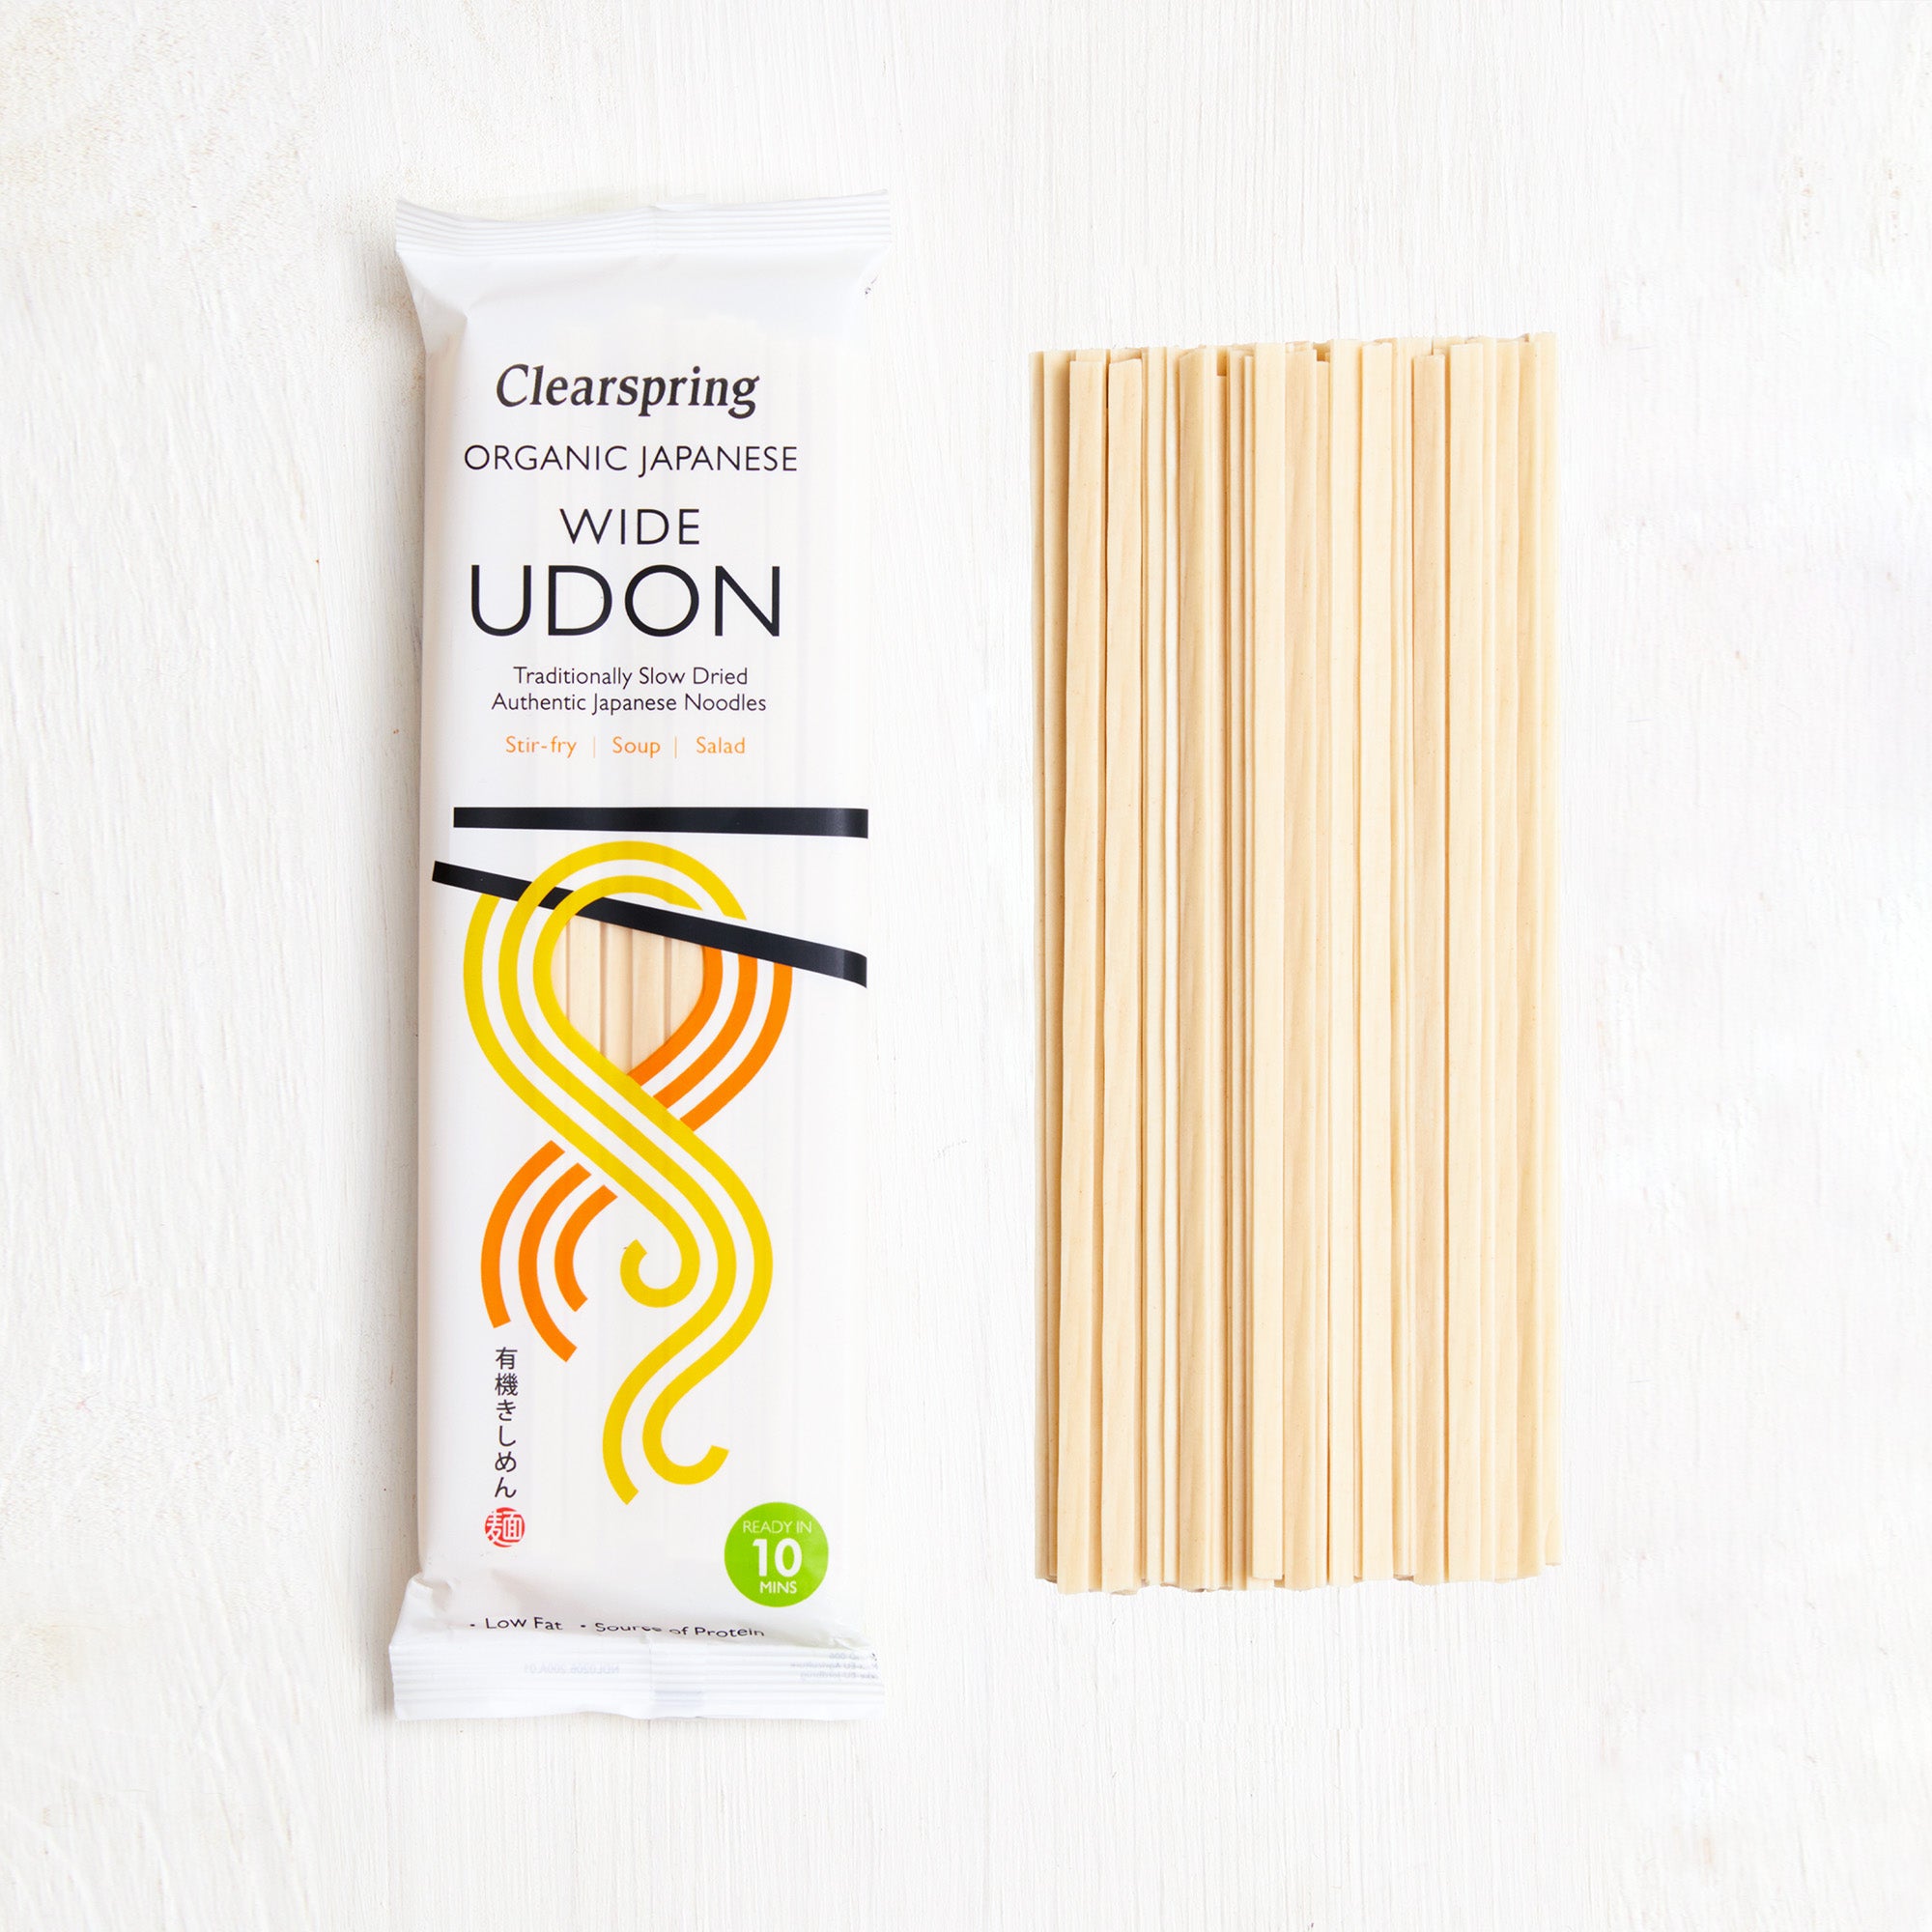 Clearspring Organic Japanese Wide Udon Noodles